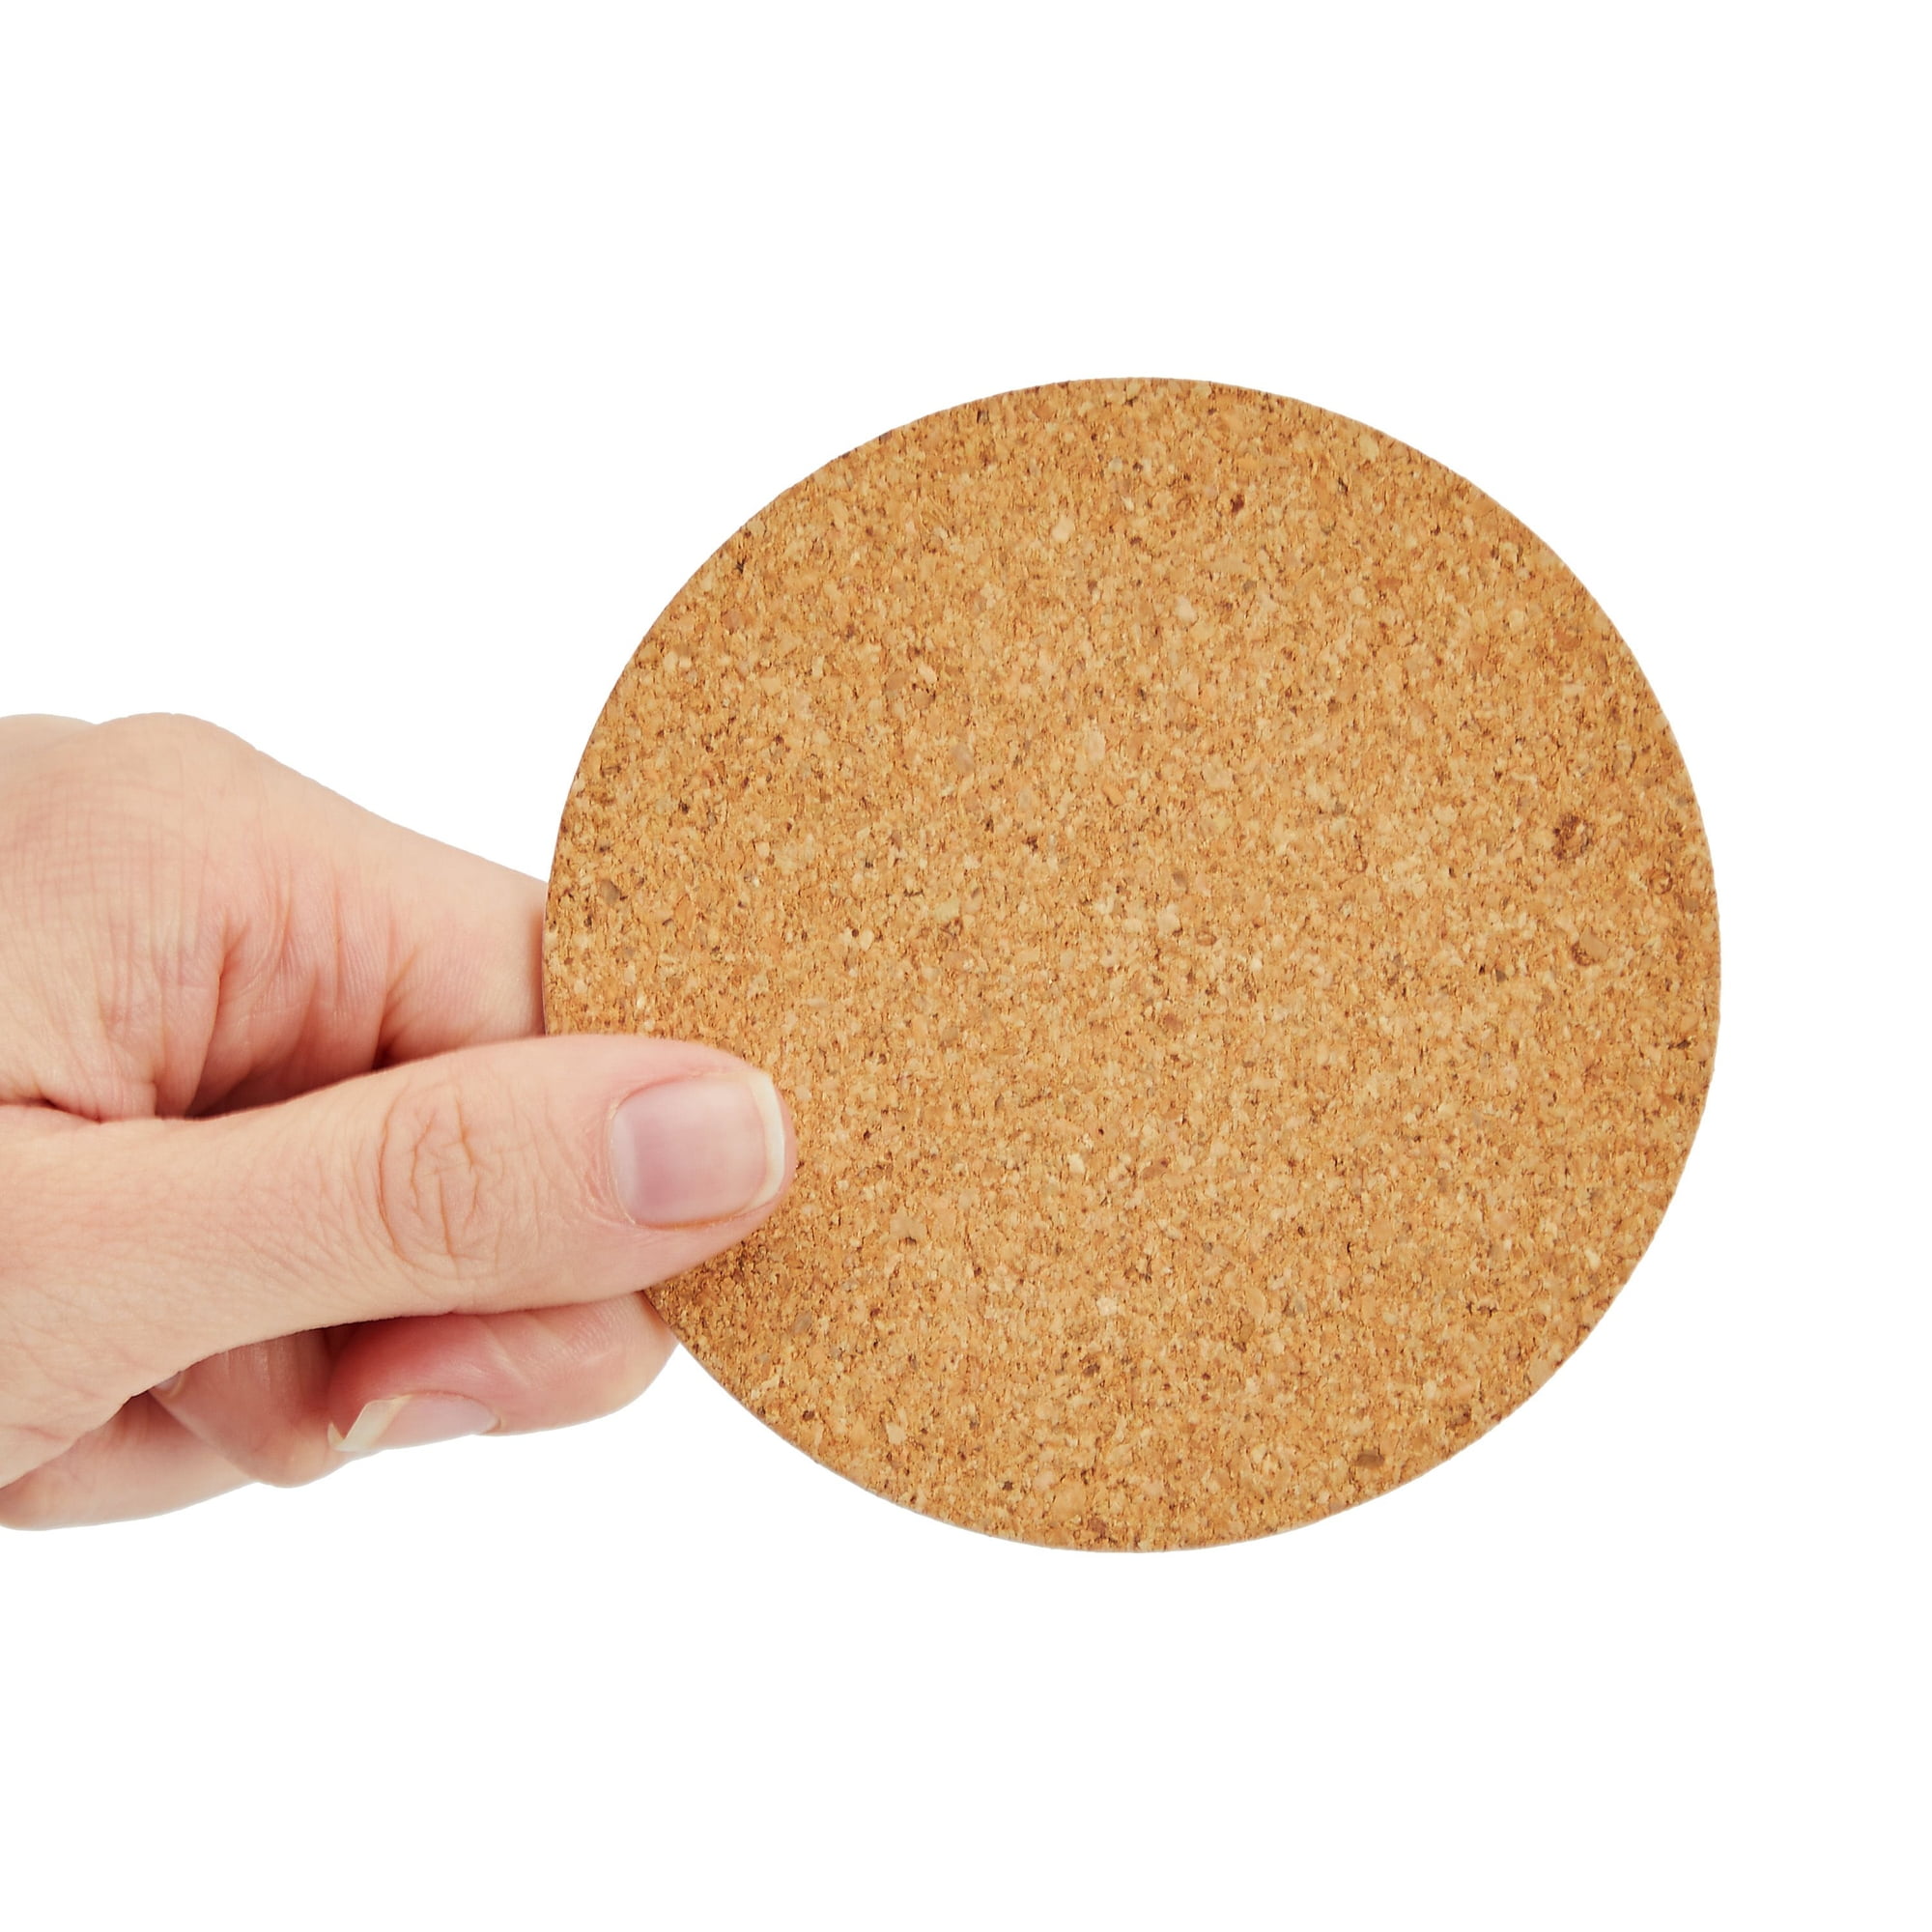 Cork Backing for 3.5 Inch Round Coaster (Self-Adhesive) – Art Füzd